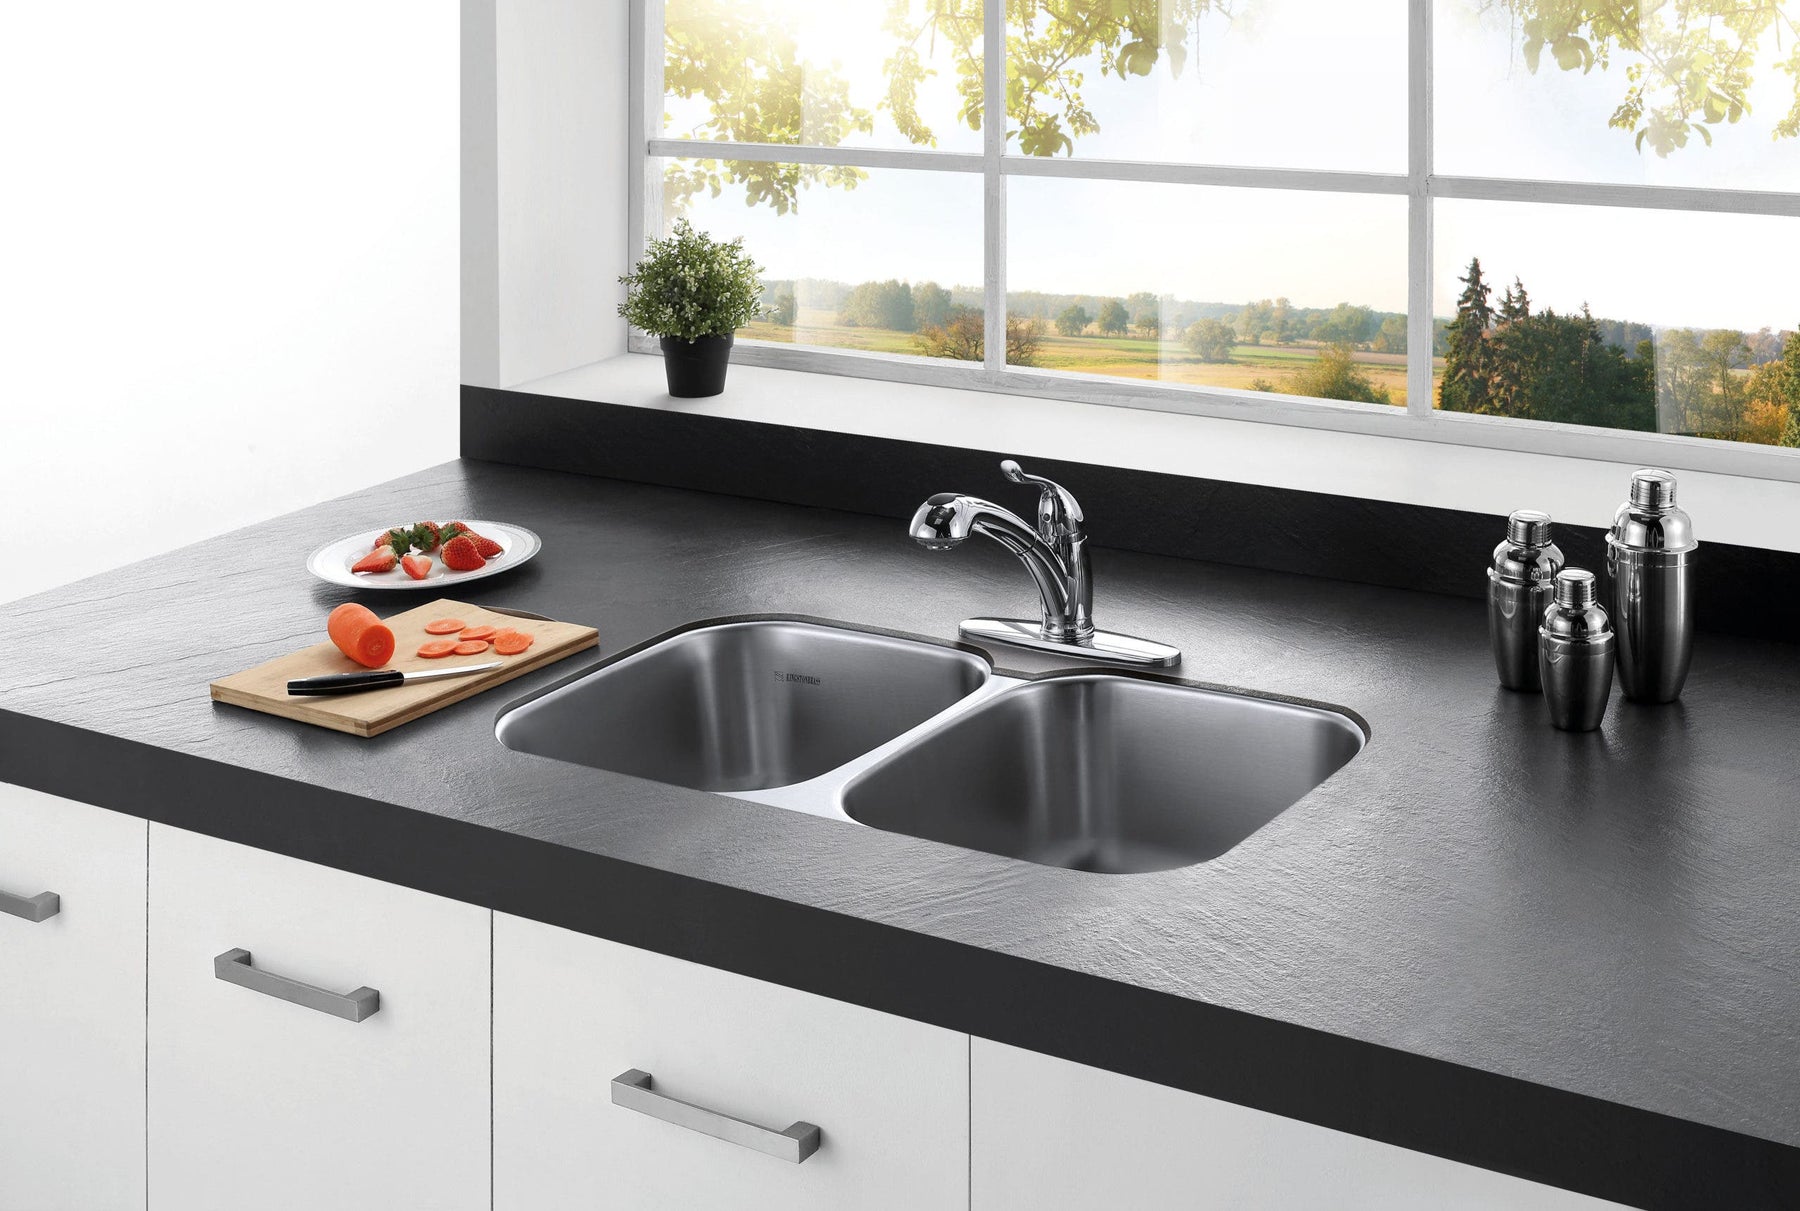 Design Benefits of a Pull-Out Faucet